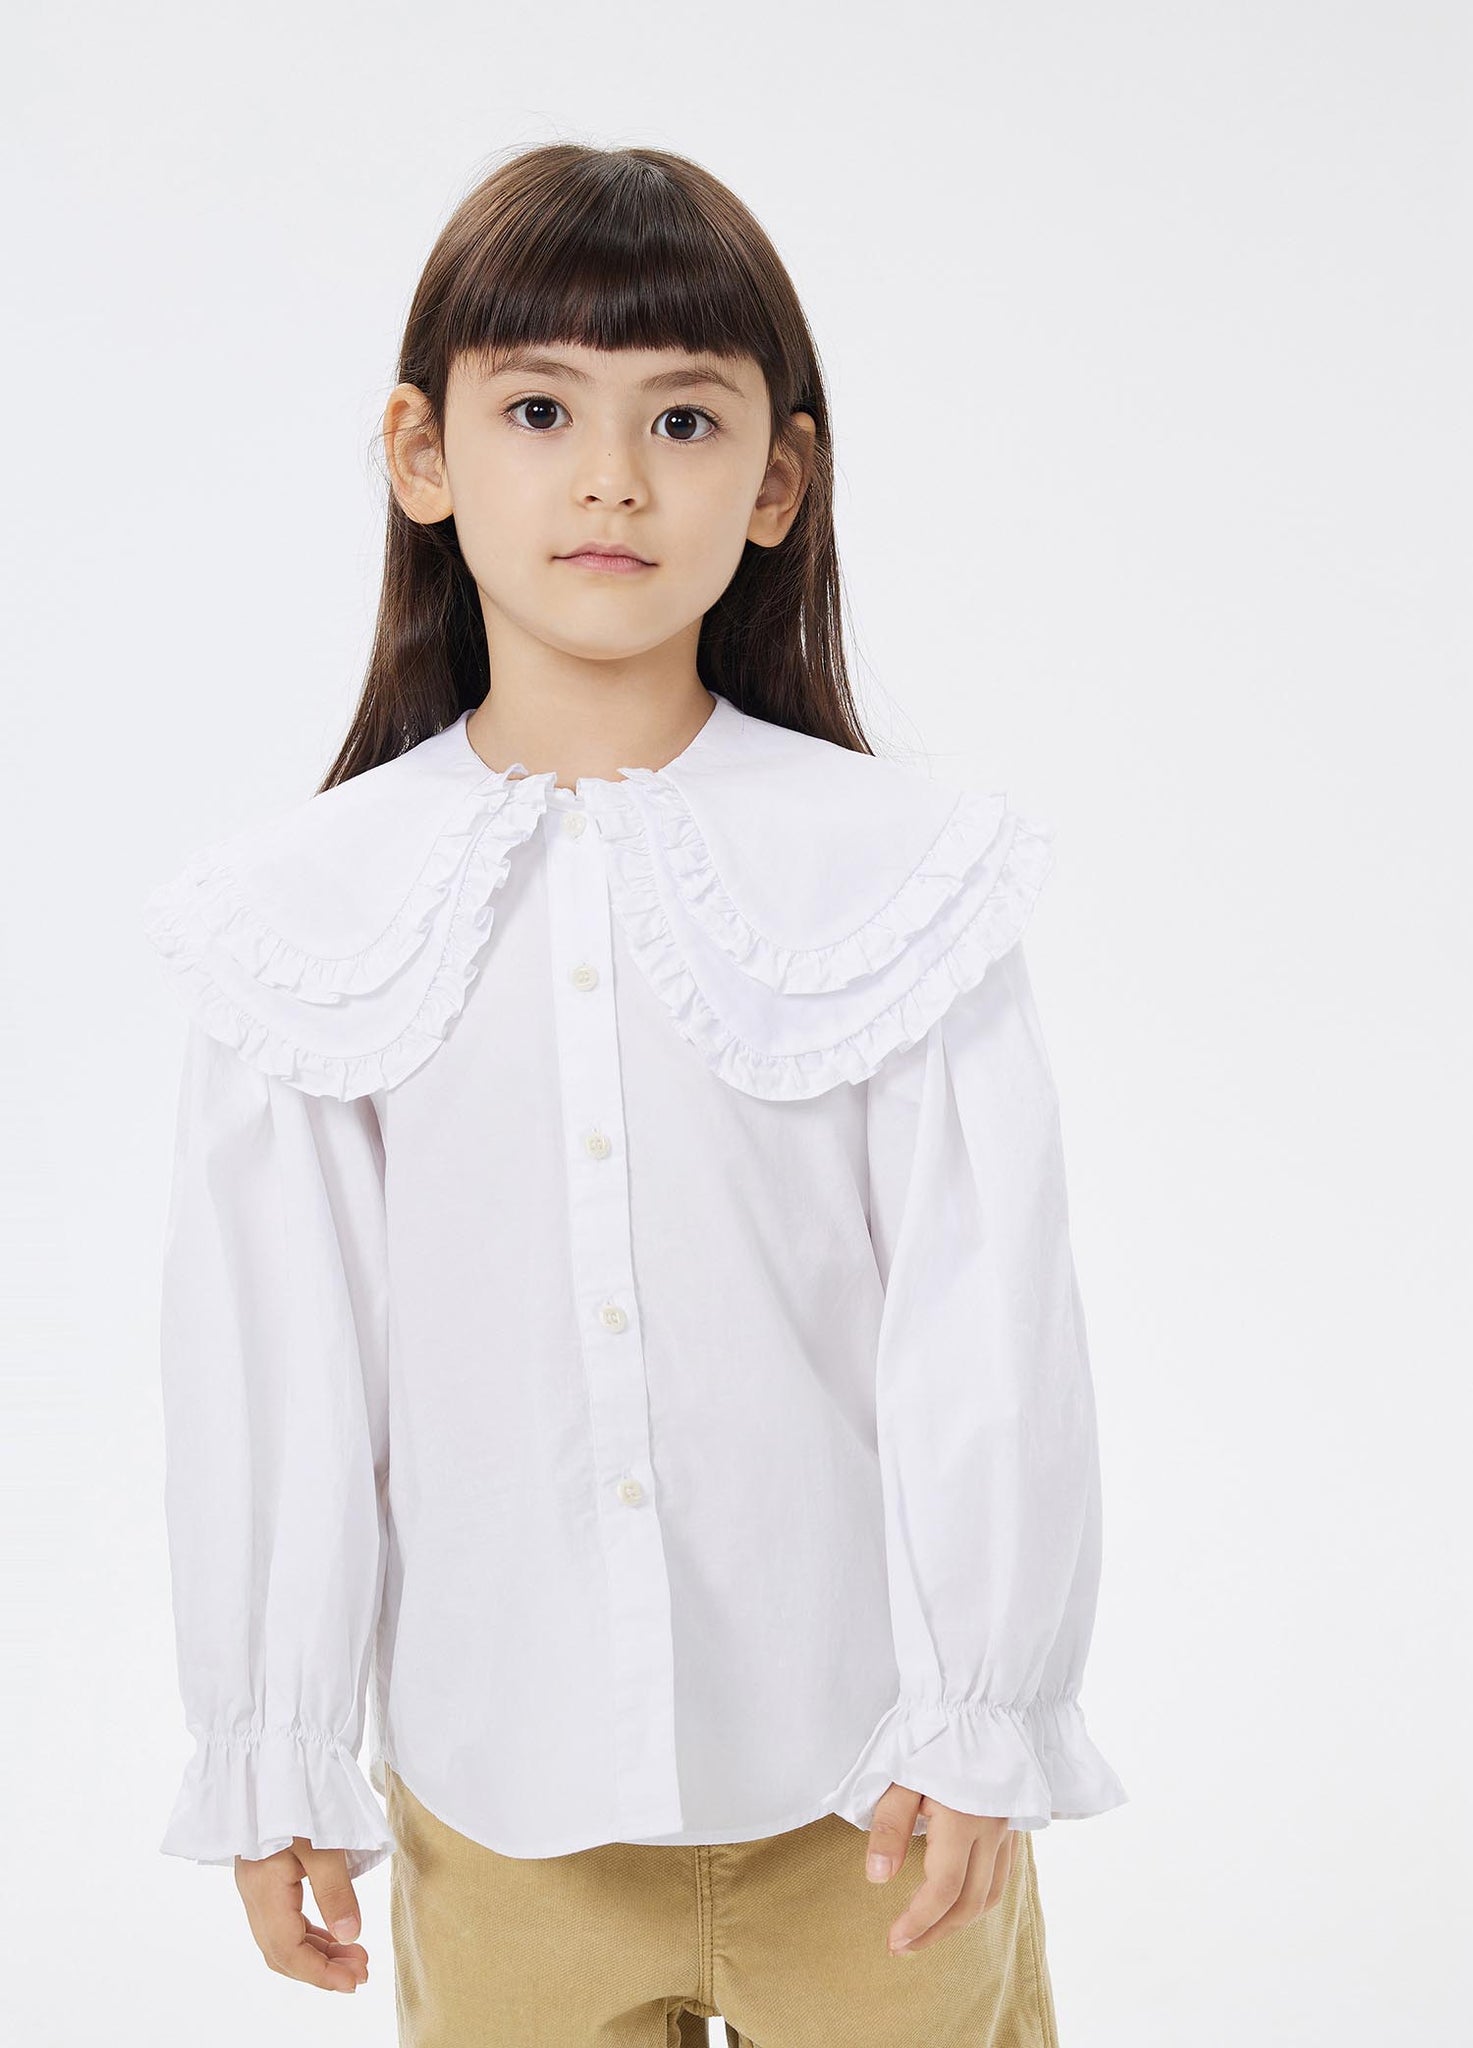 Shirt / jnby by JNBY Large Lace Collar Long Sleeve Shirt